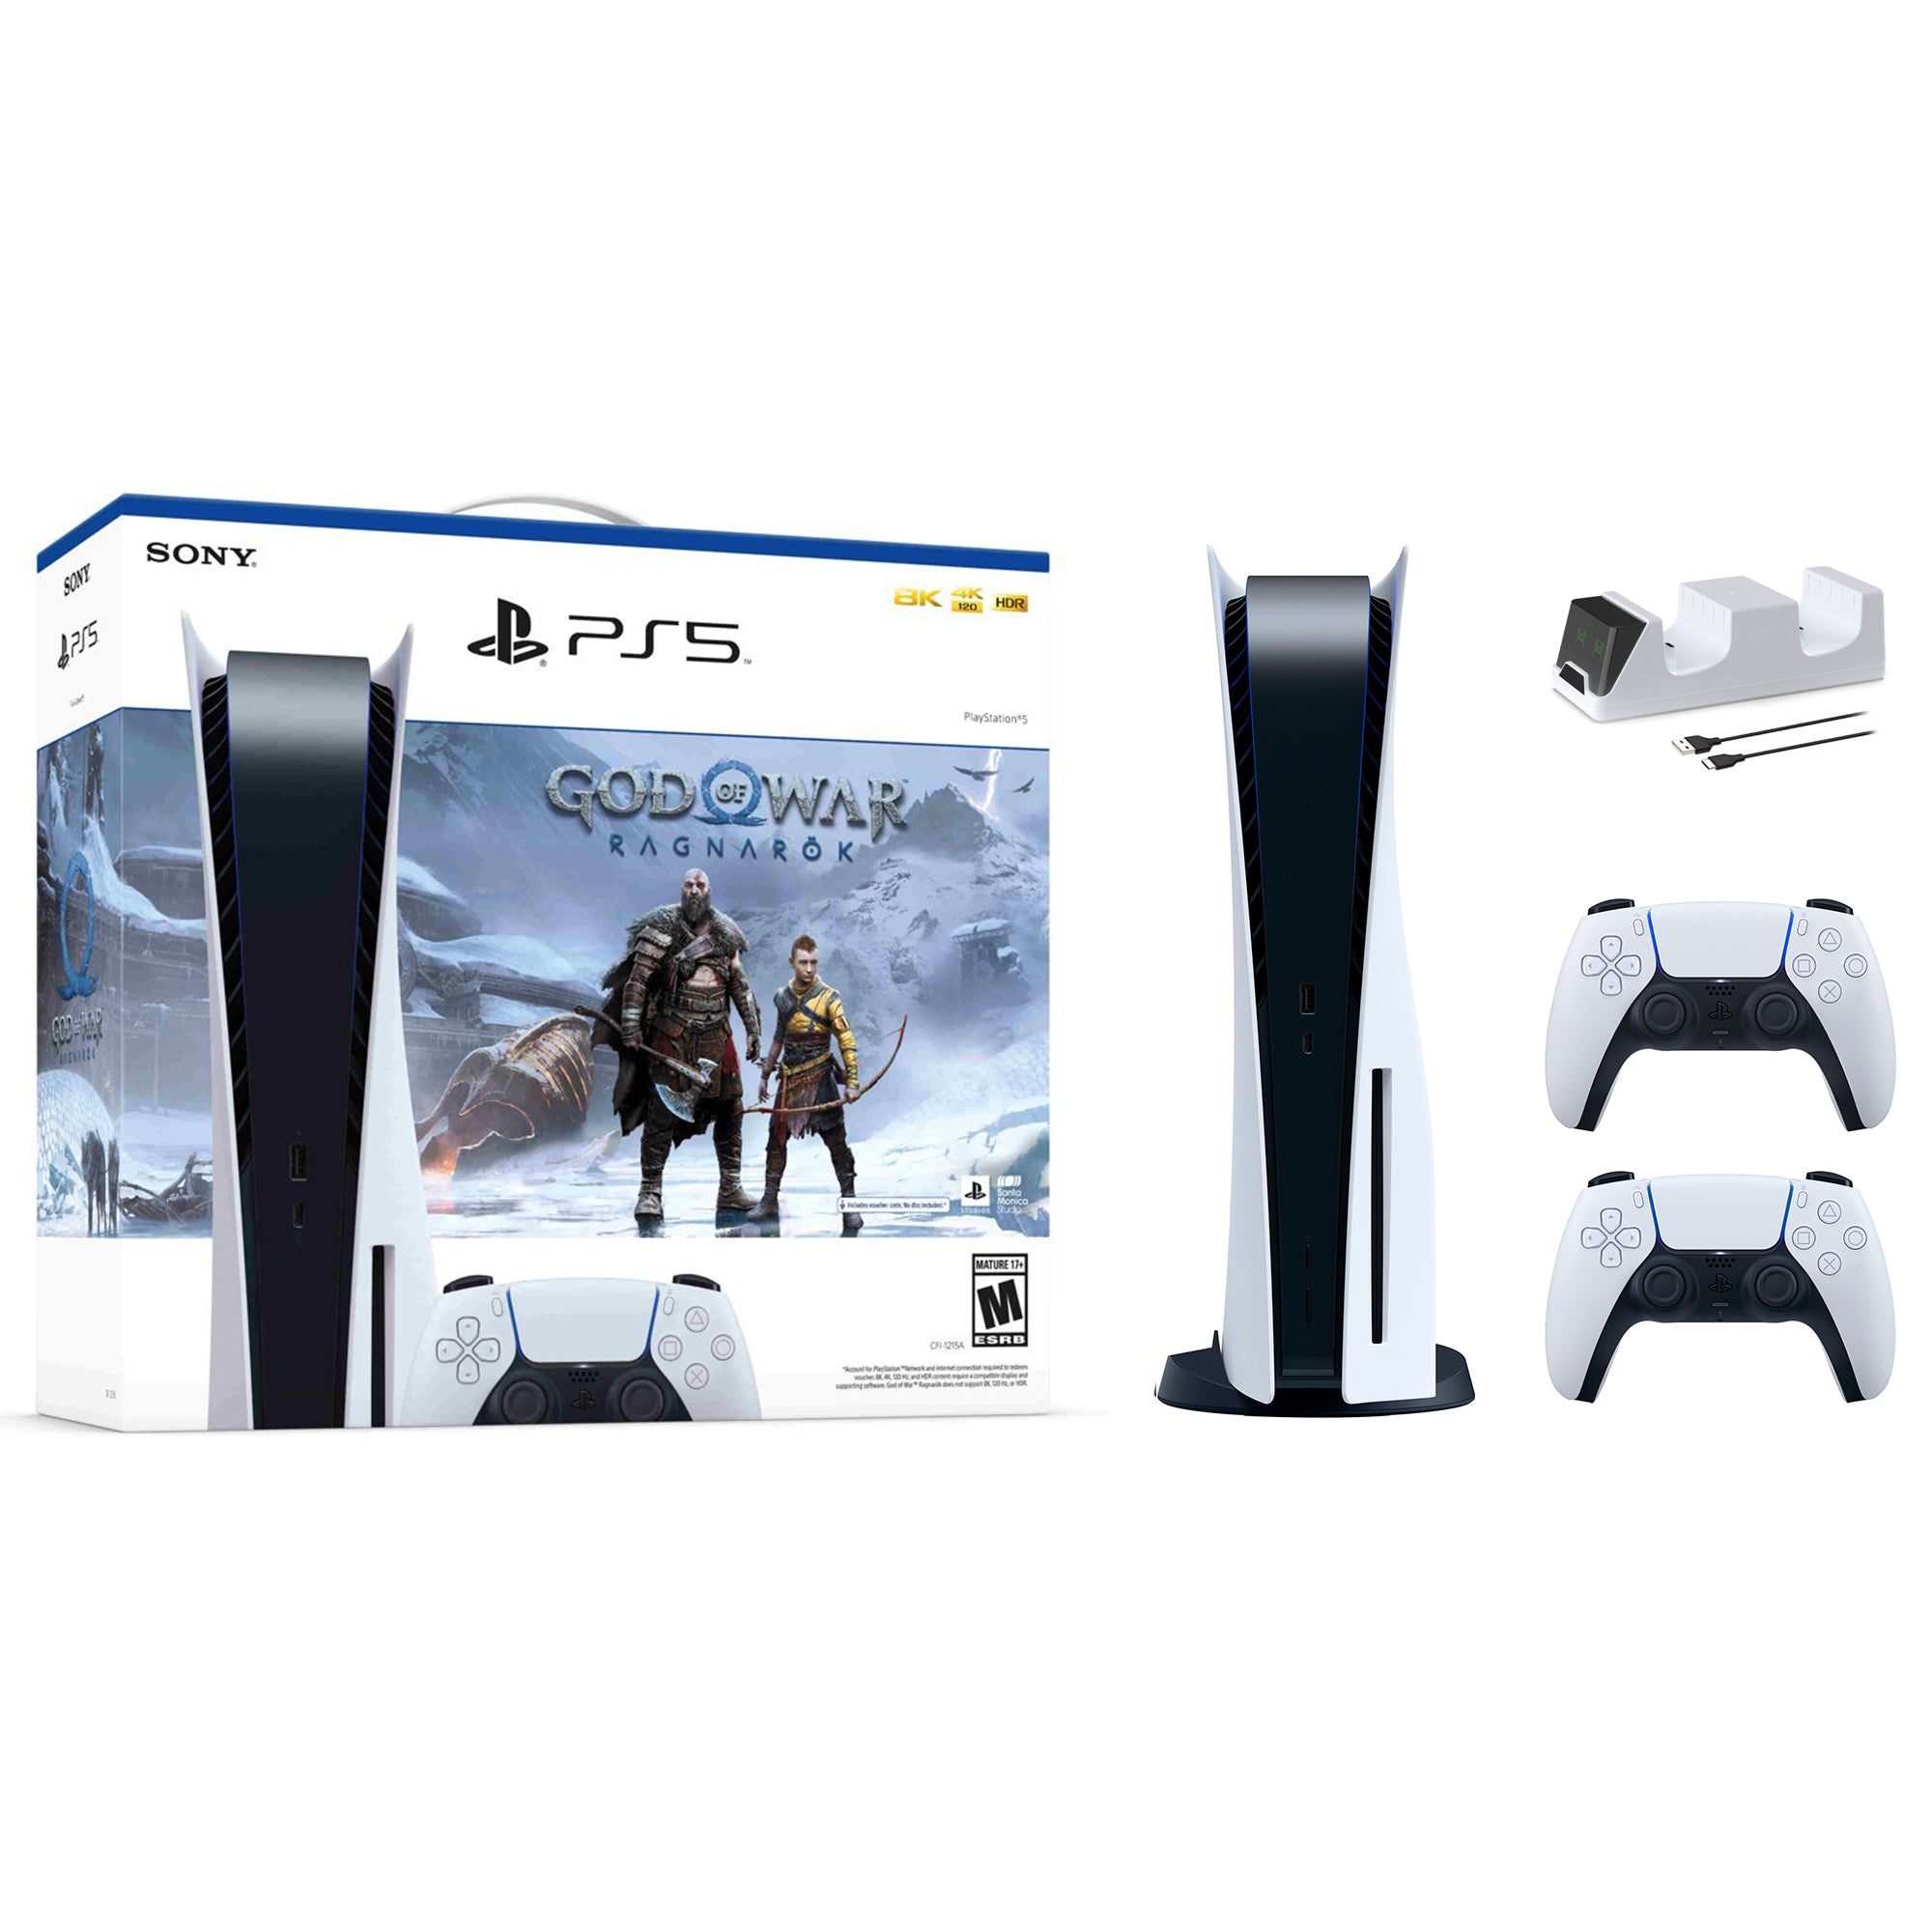 PlayStation 5 Disc Edition God of War Ragnarok Bundle with Two DualSense Controllers and Mytrix Dual Controller Charger